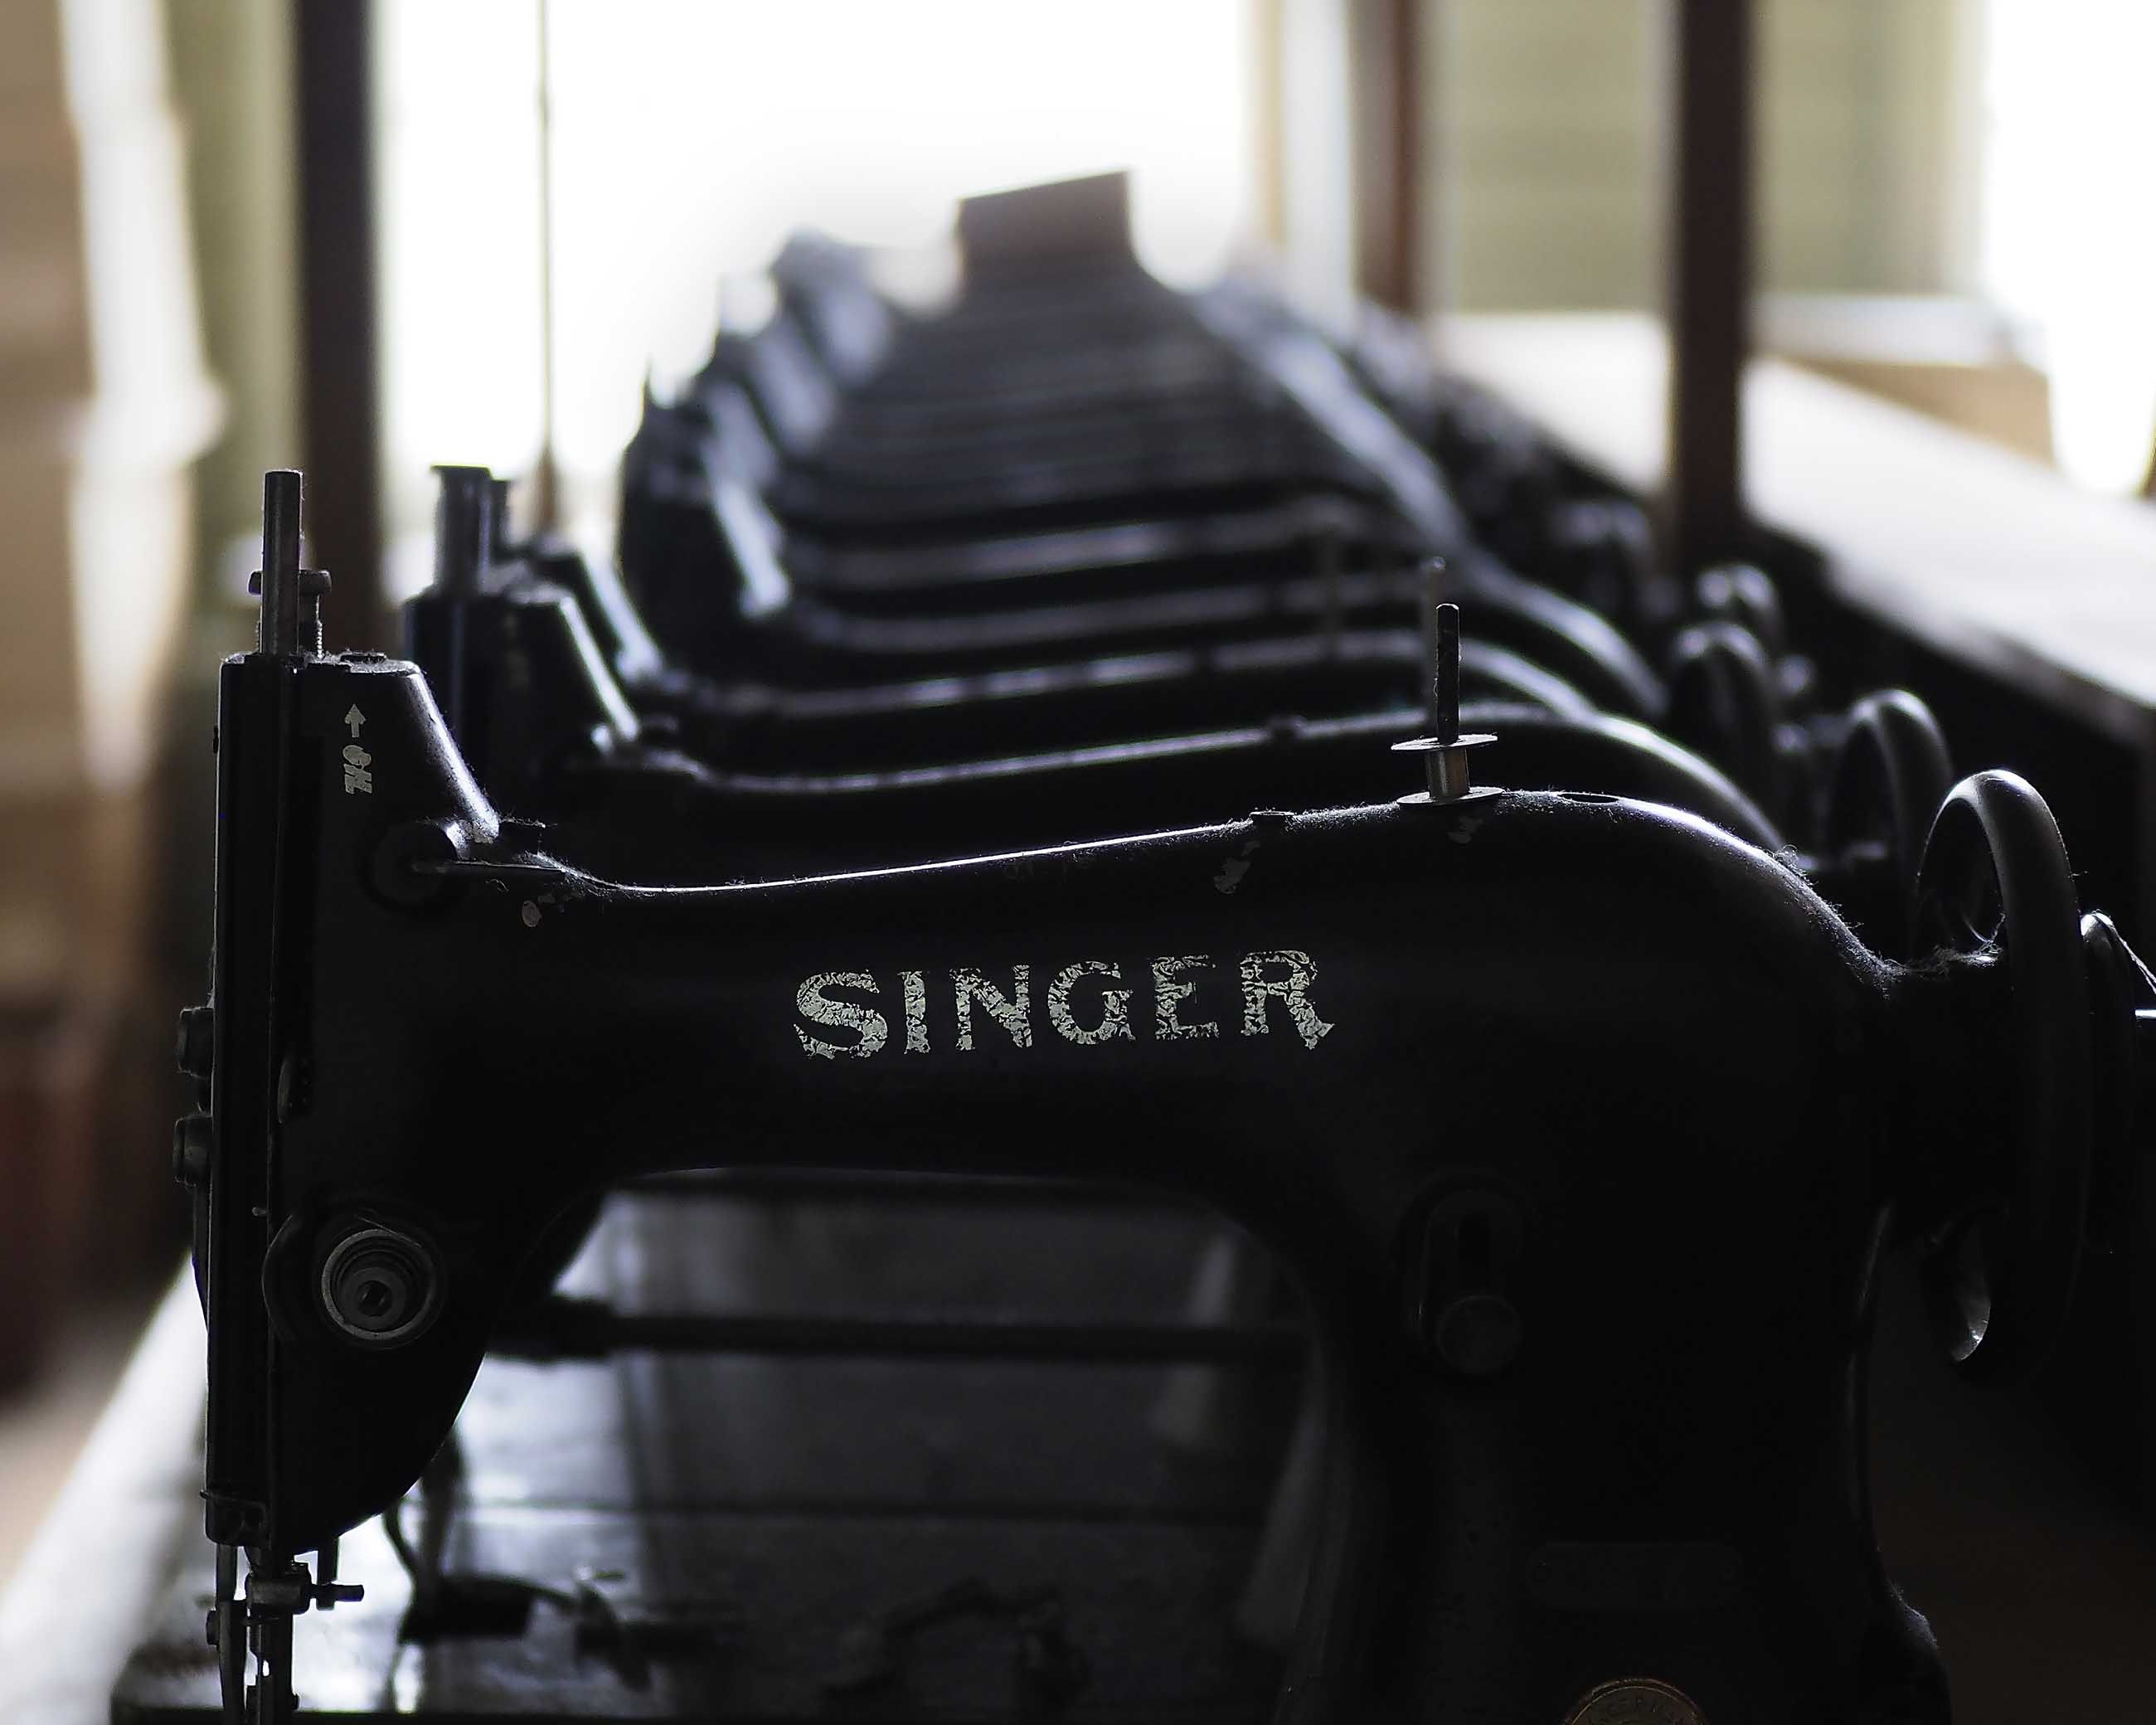 A row of old Singer sewing machines stacked in a storeroom at Samco recalls the region’s heyday as the self-proclaimed glove-making capital of the world. Image by Larry C. Price. United States, 2016.